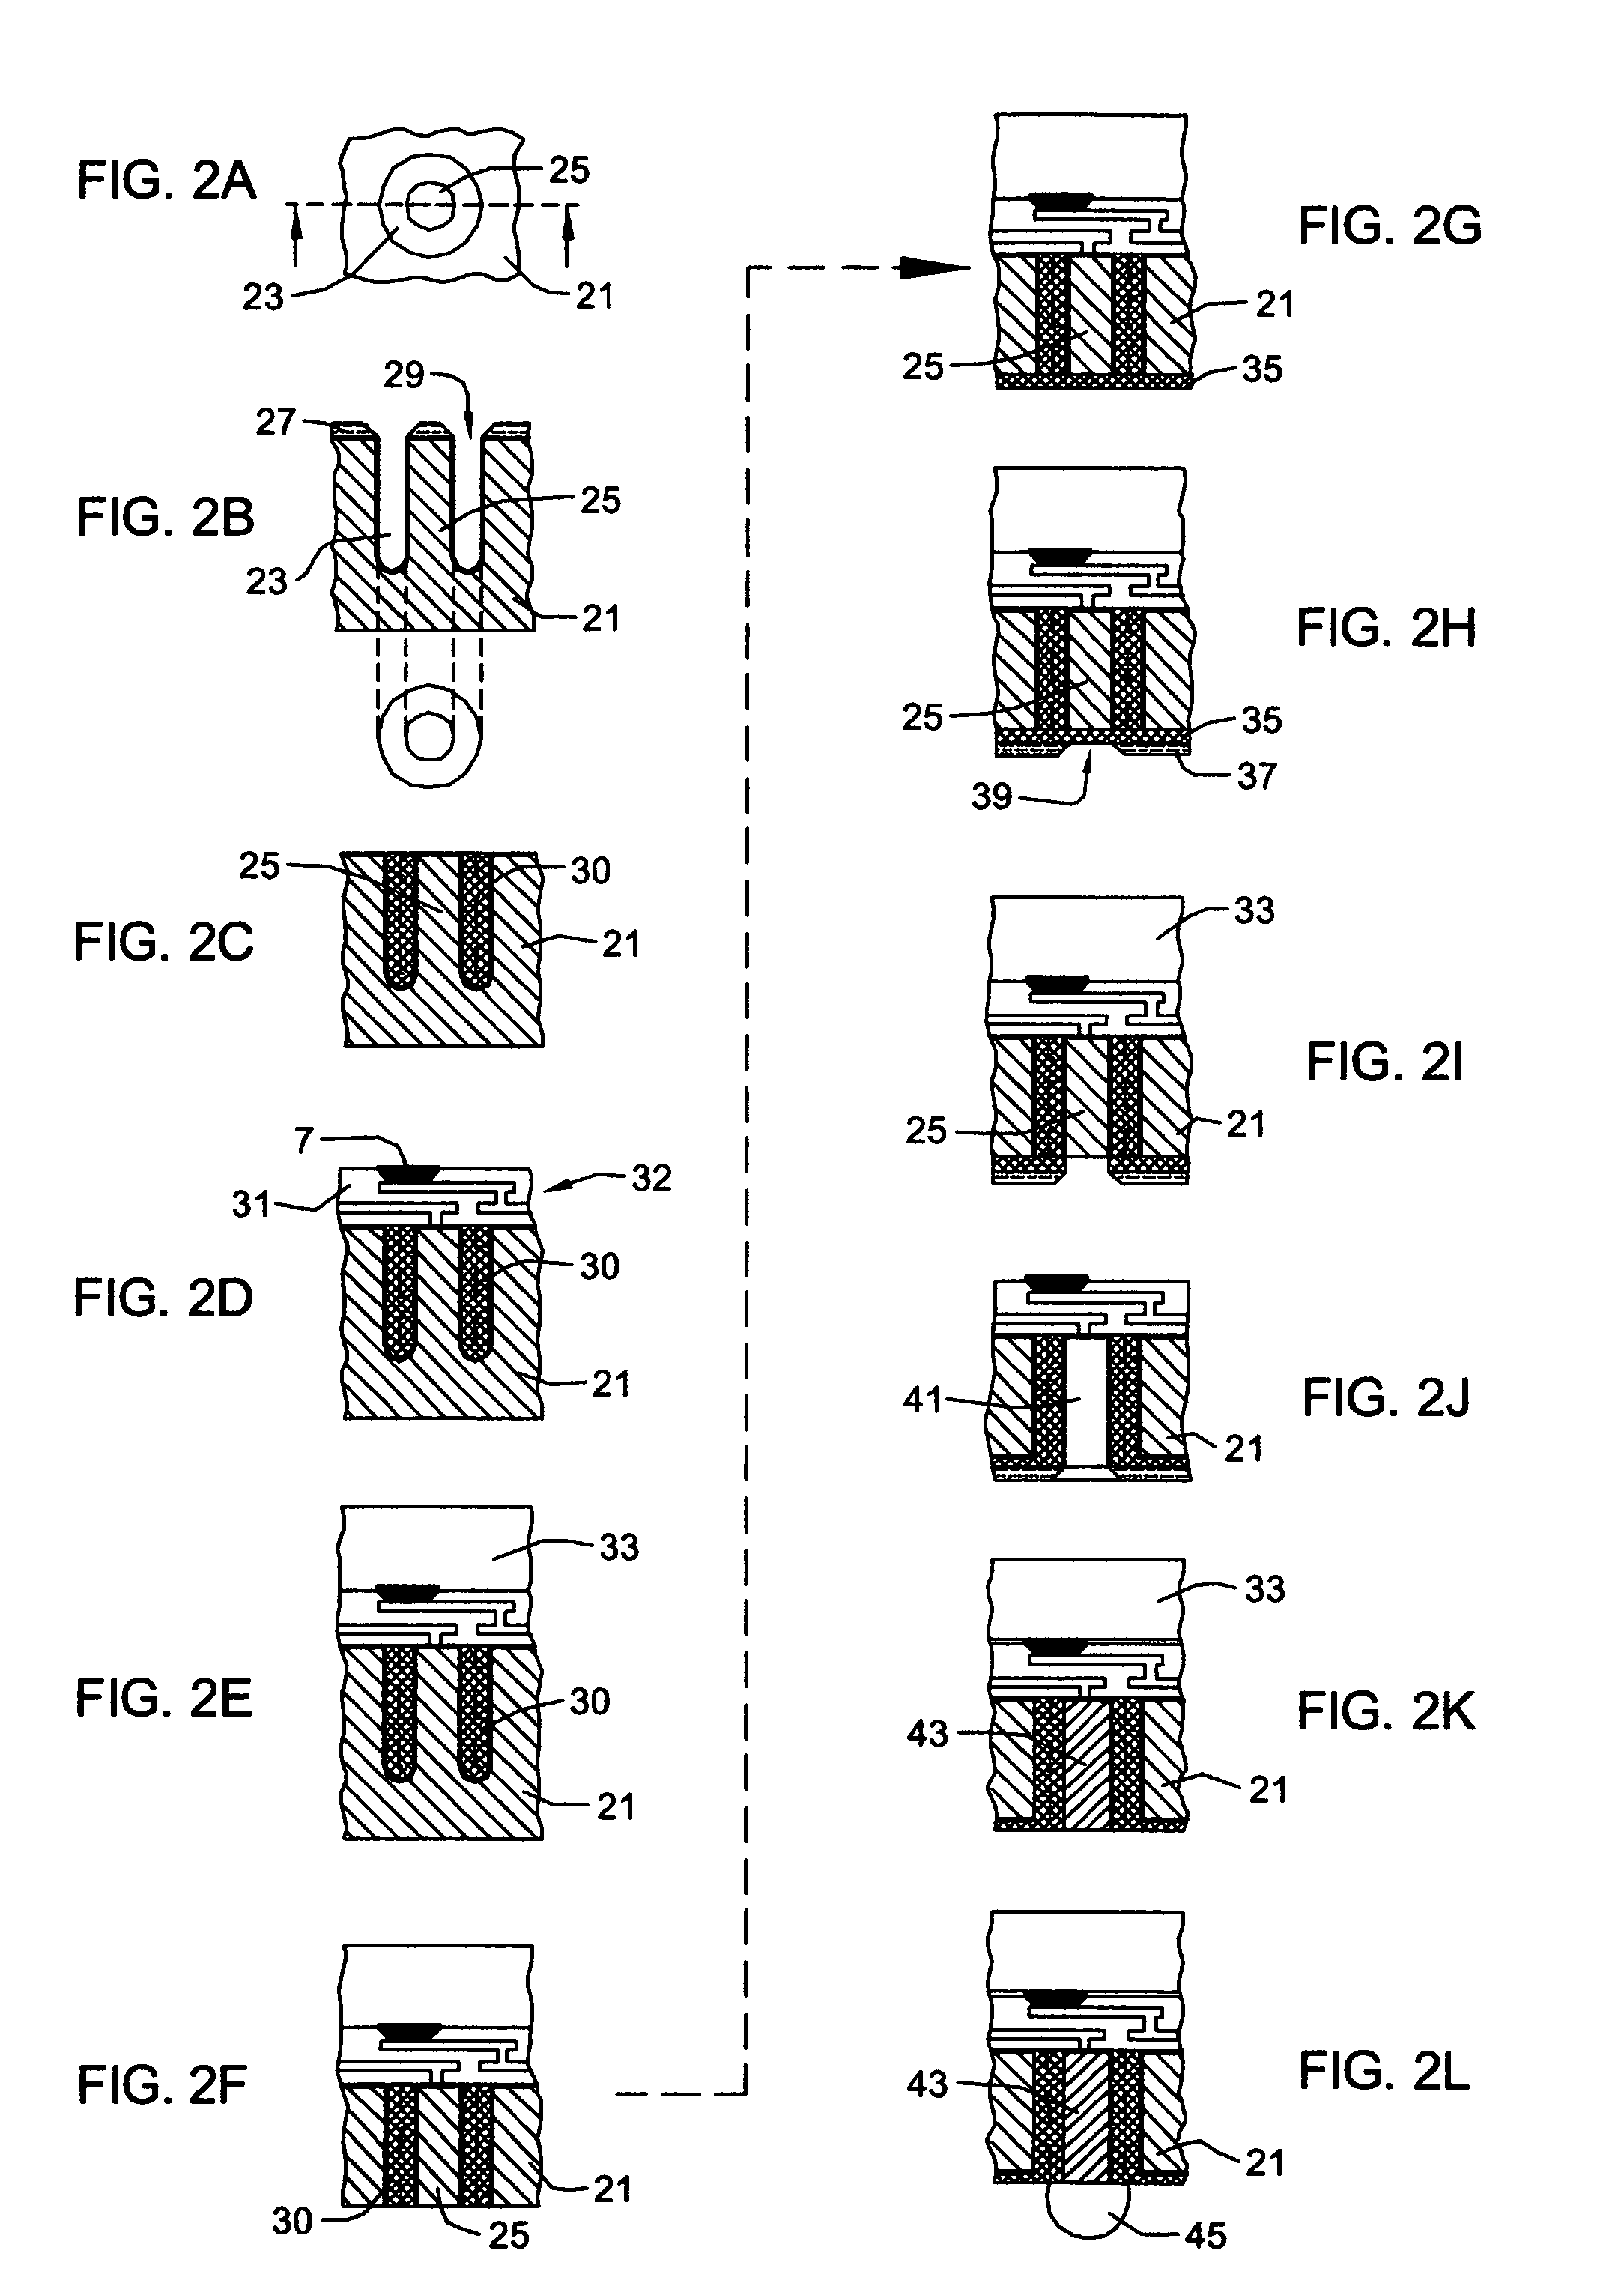 Conductive through via process for electronic device carriers